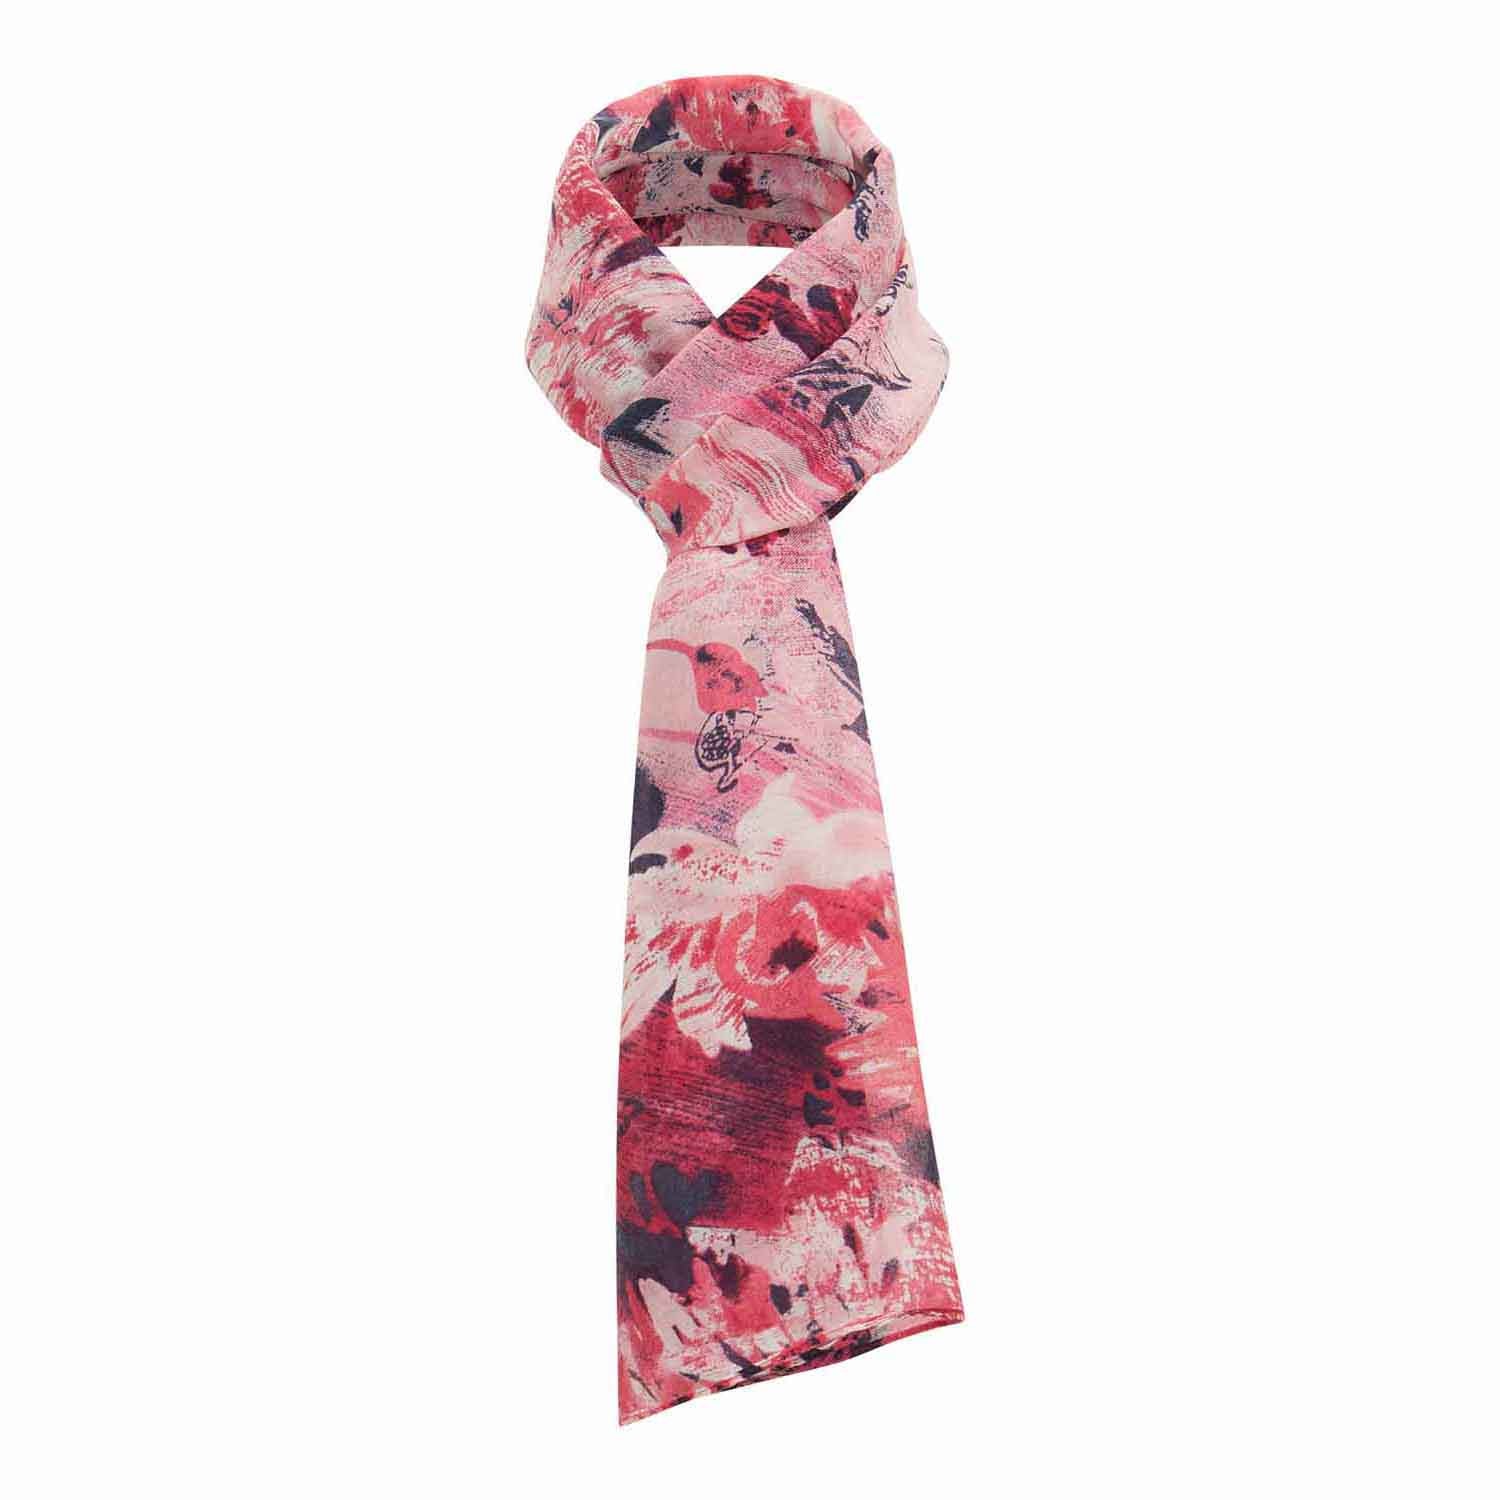 Tigiwear Flora Abstract Print Scarf 2 Shaws Department Stores